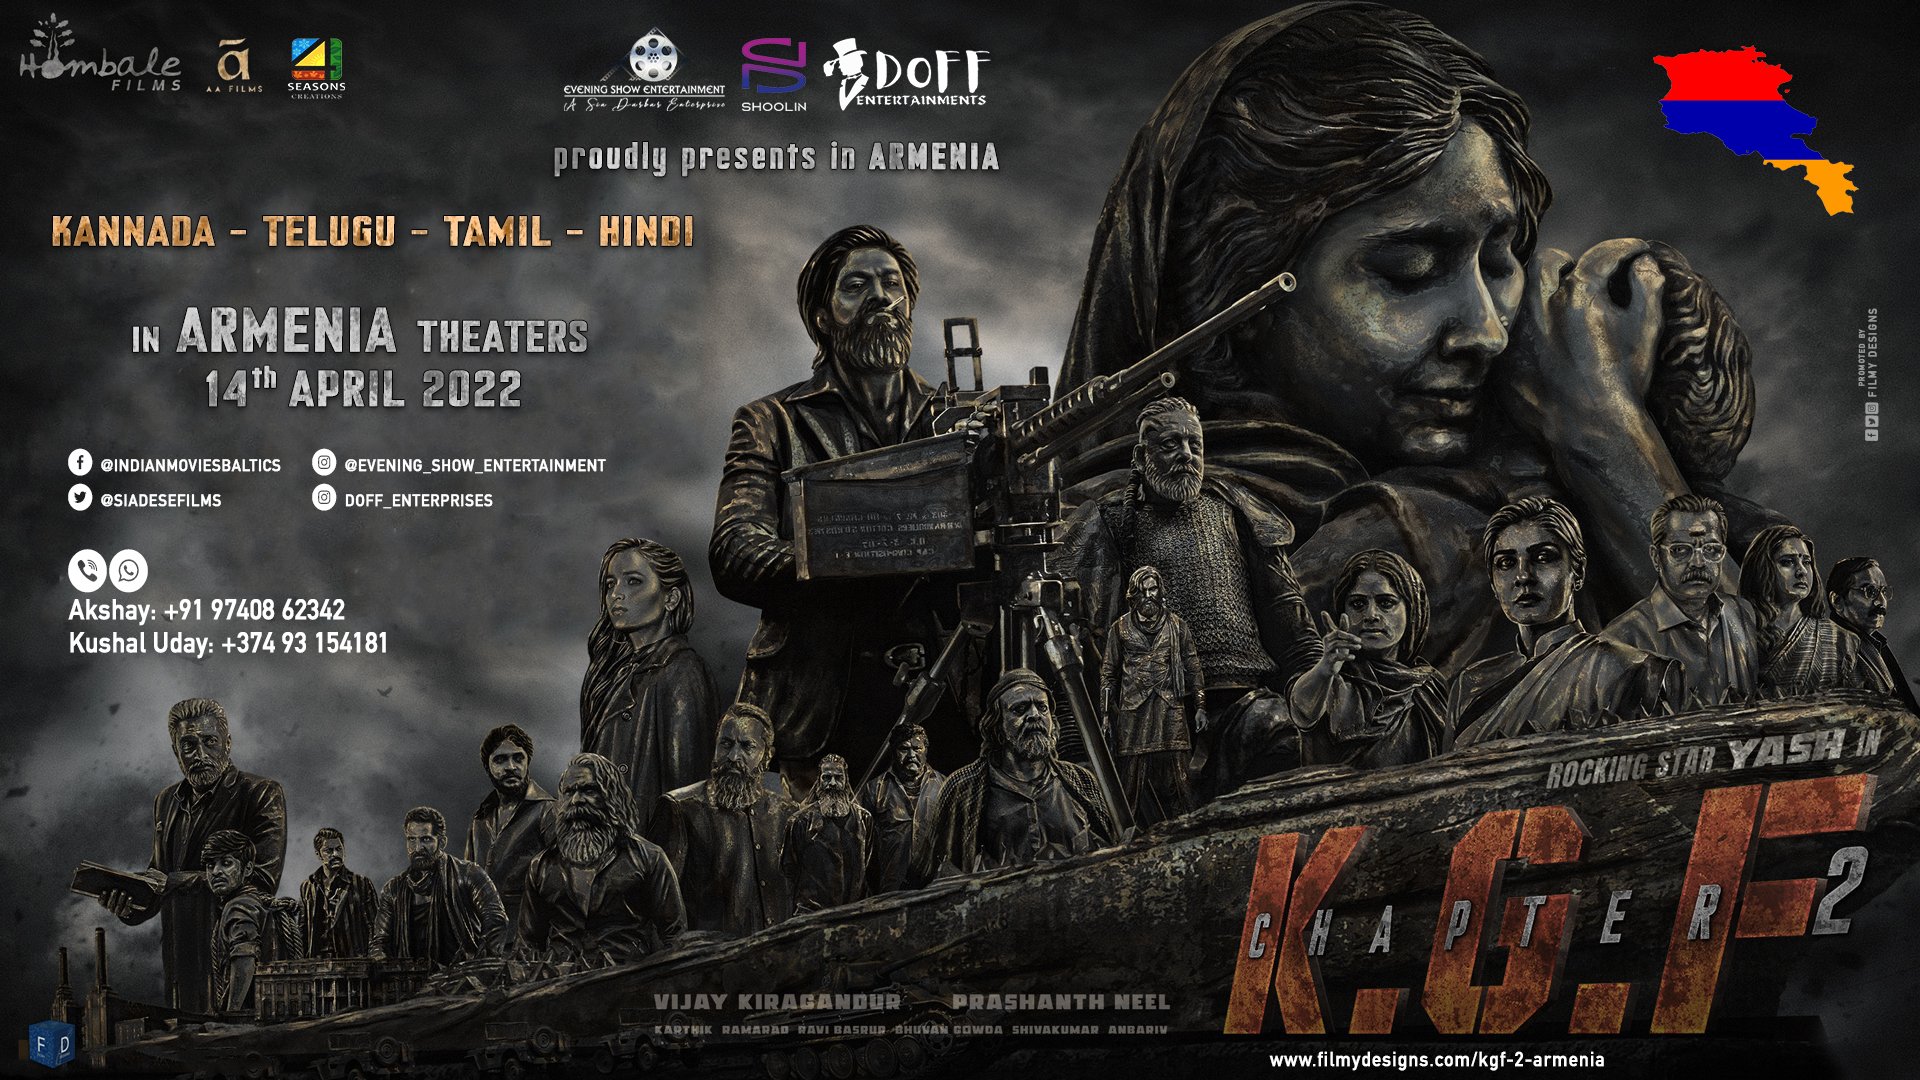 Telugu Governments might accept the price hike for KGF-2: Booking will open on Monday